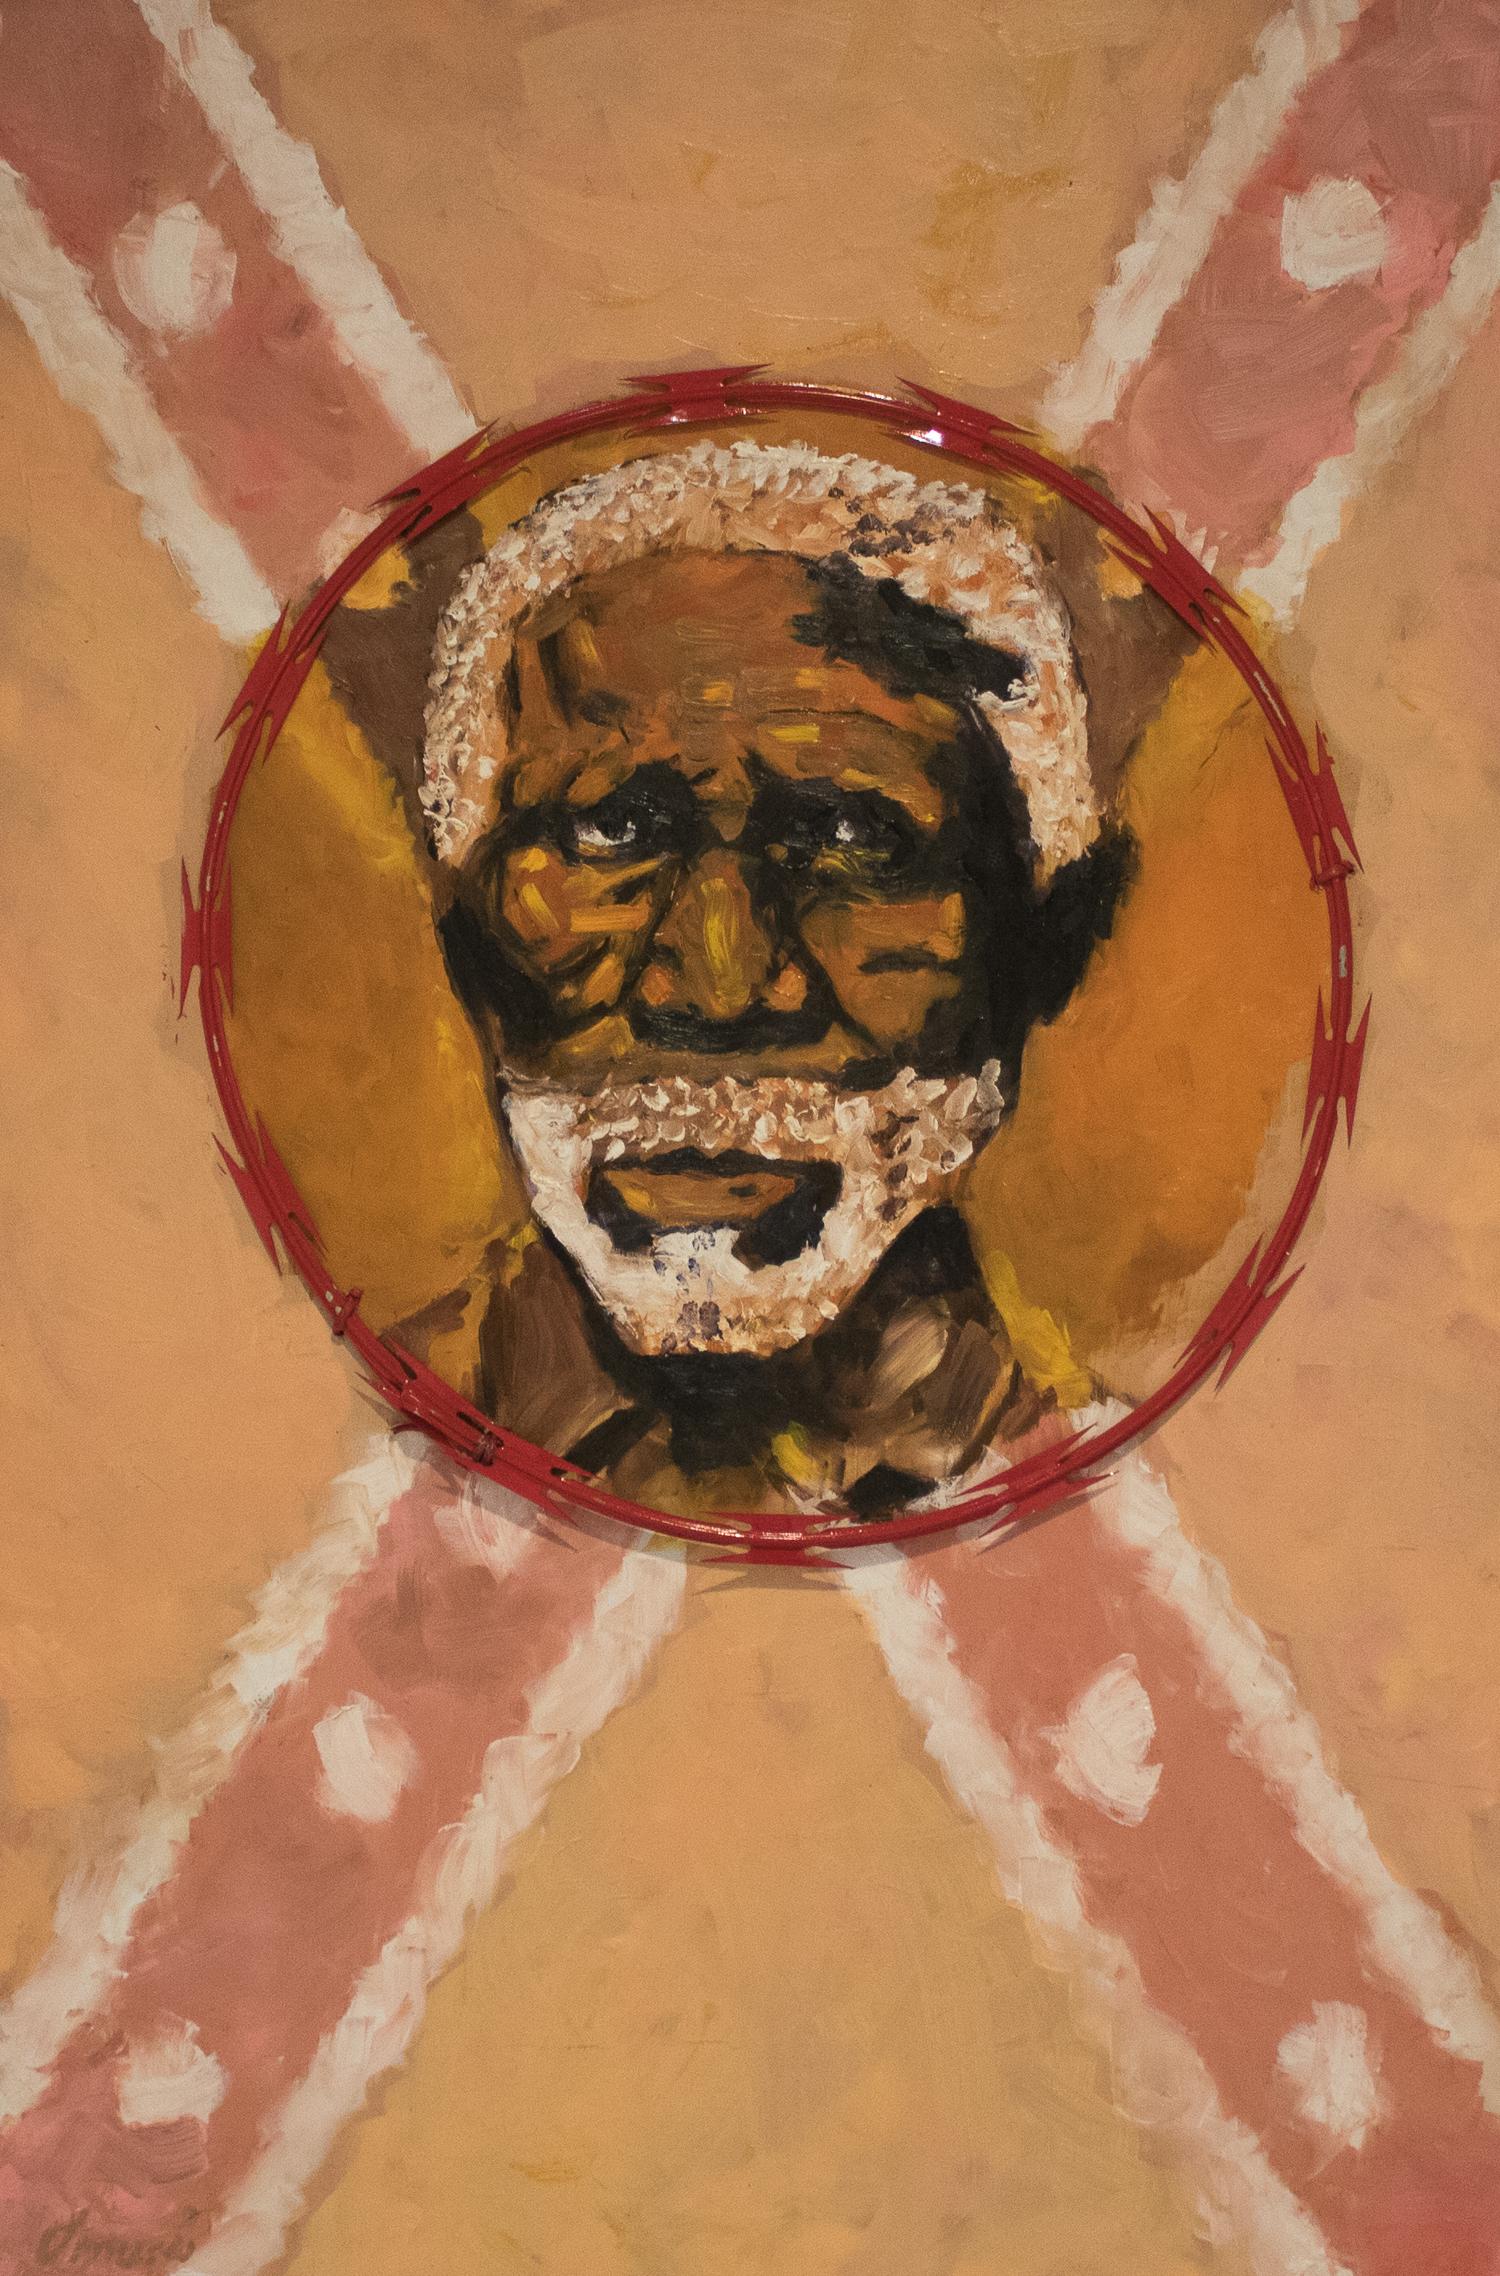 REBEL - contemporary political oil painting on wood, razor wire, brown, pink red - Mixed Media Art by Omari Booker